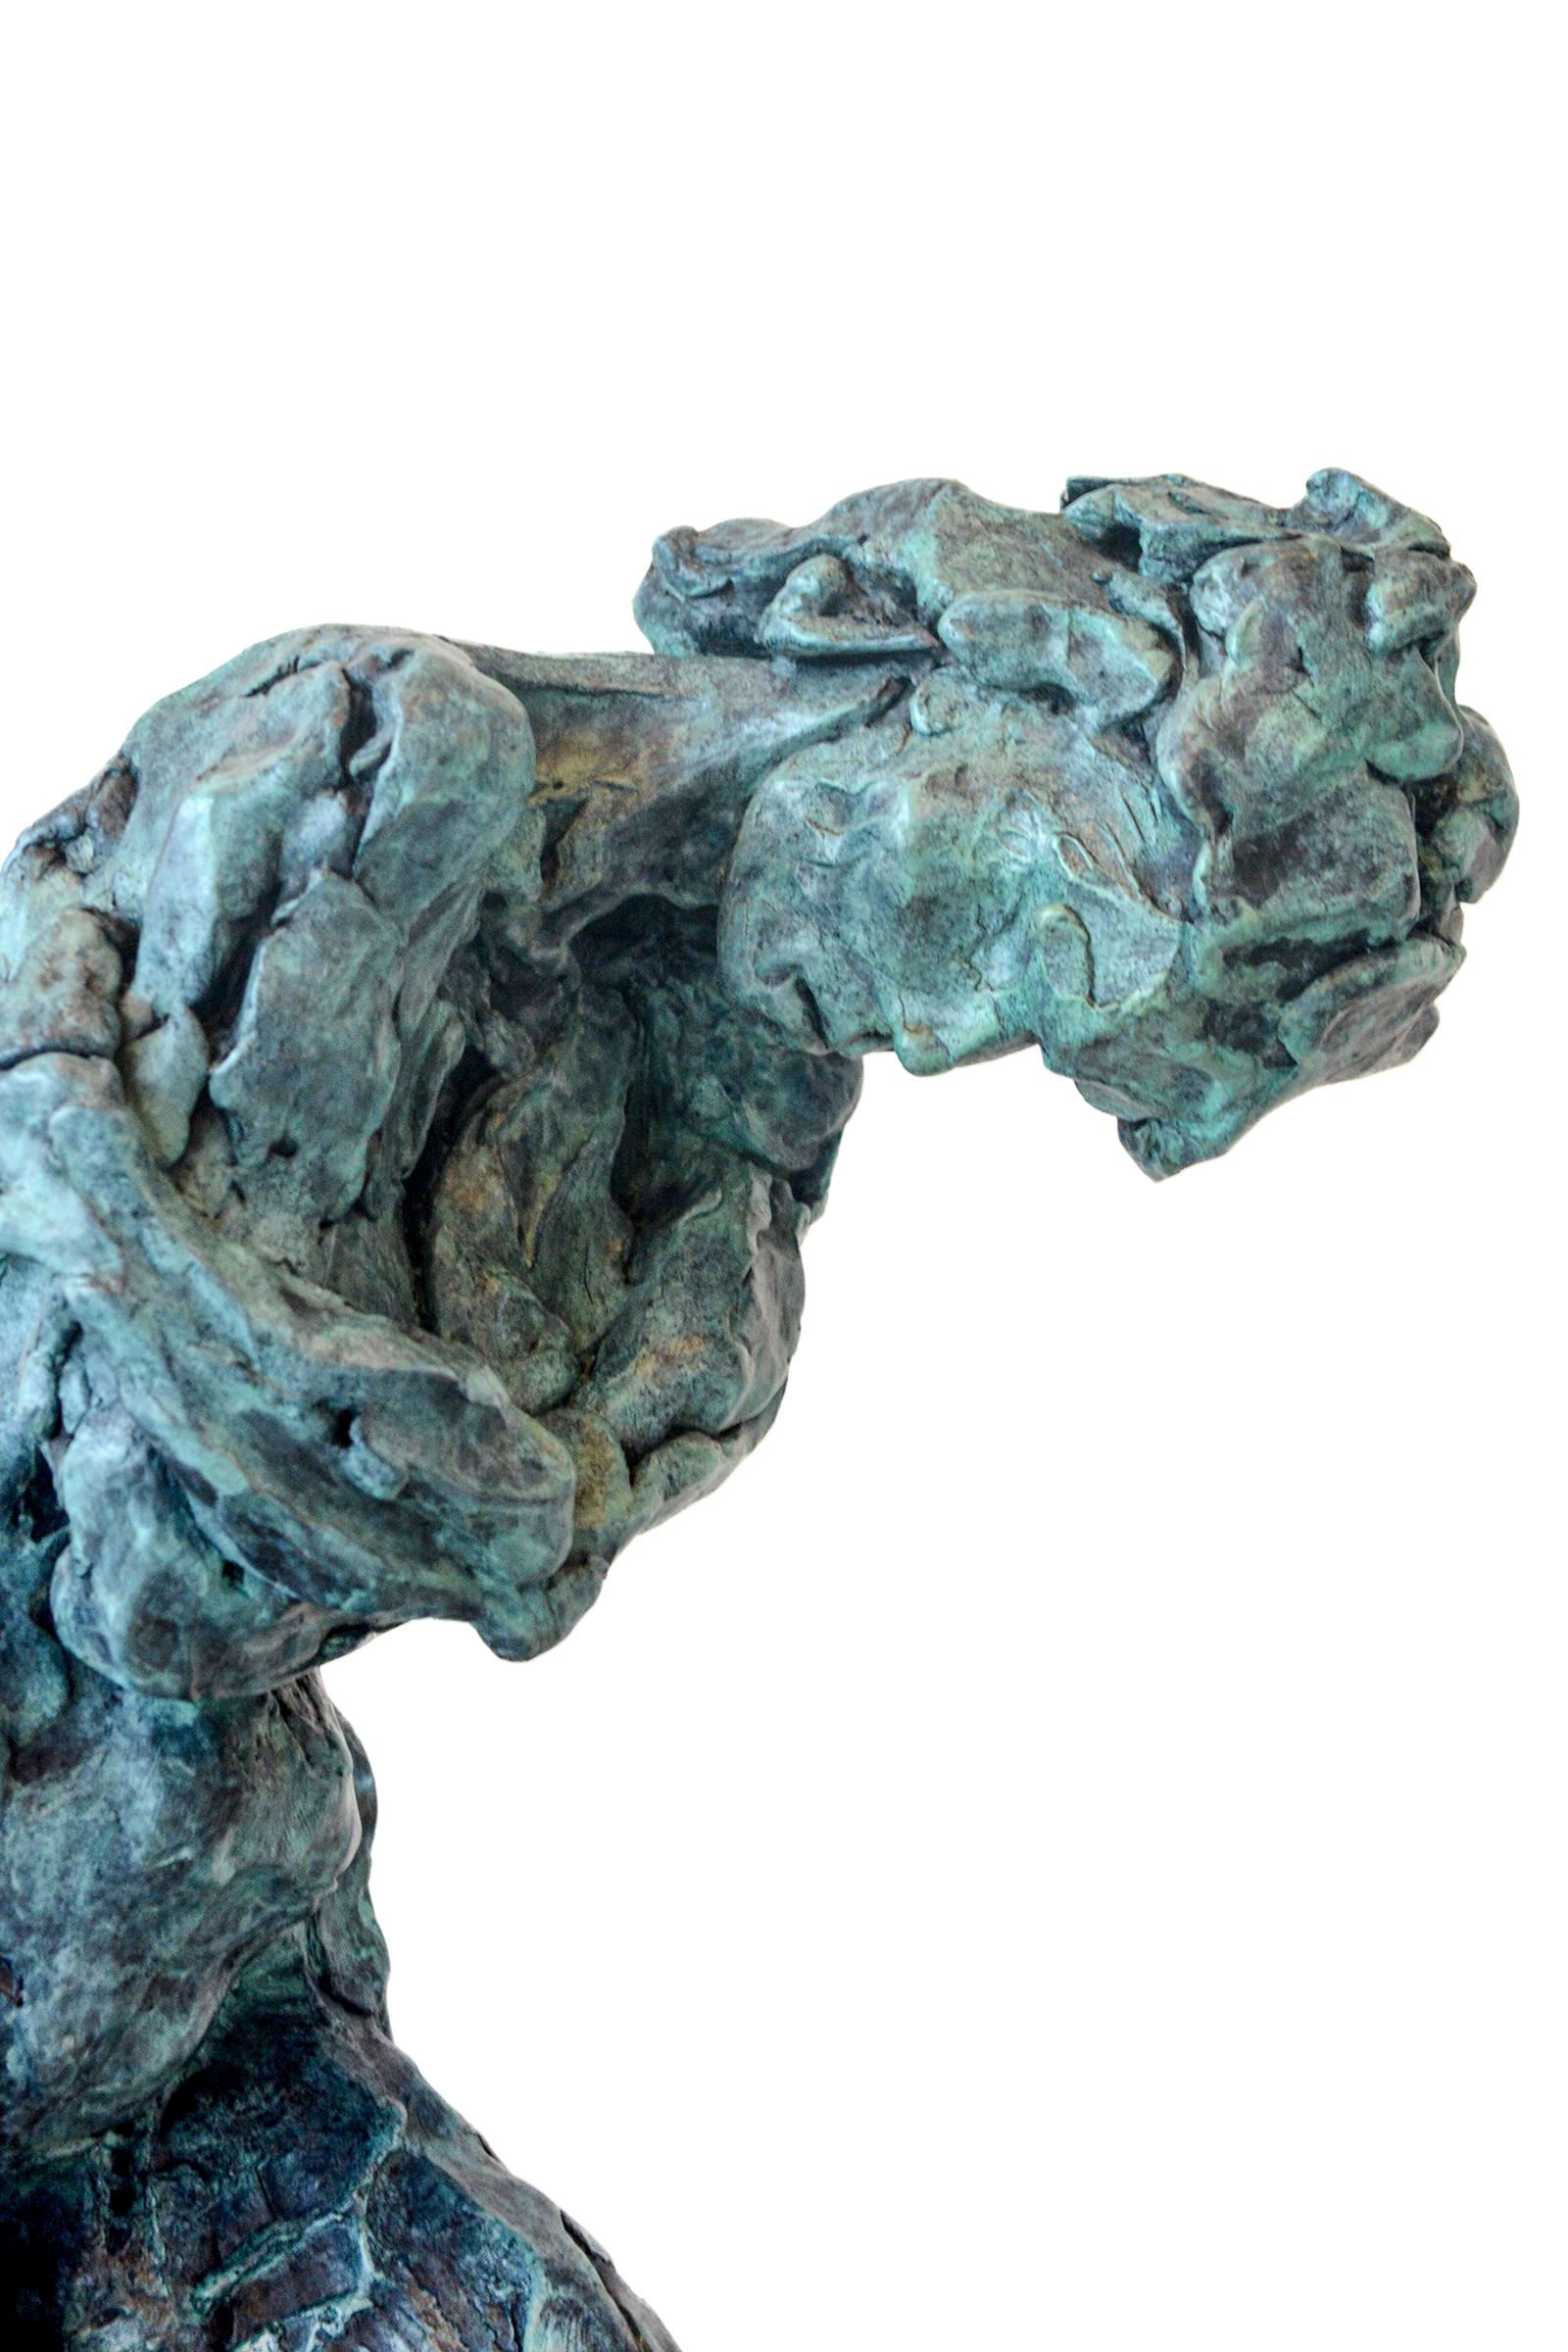 In this thoughtful sculpture by Canadian artist Richard Tosczak, the gestures of a female figure, head bent, arms wrapped, are captured in bronze. Known for his beautiful figurative work, this piece retains the artist’s signature highly textured